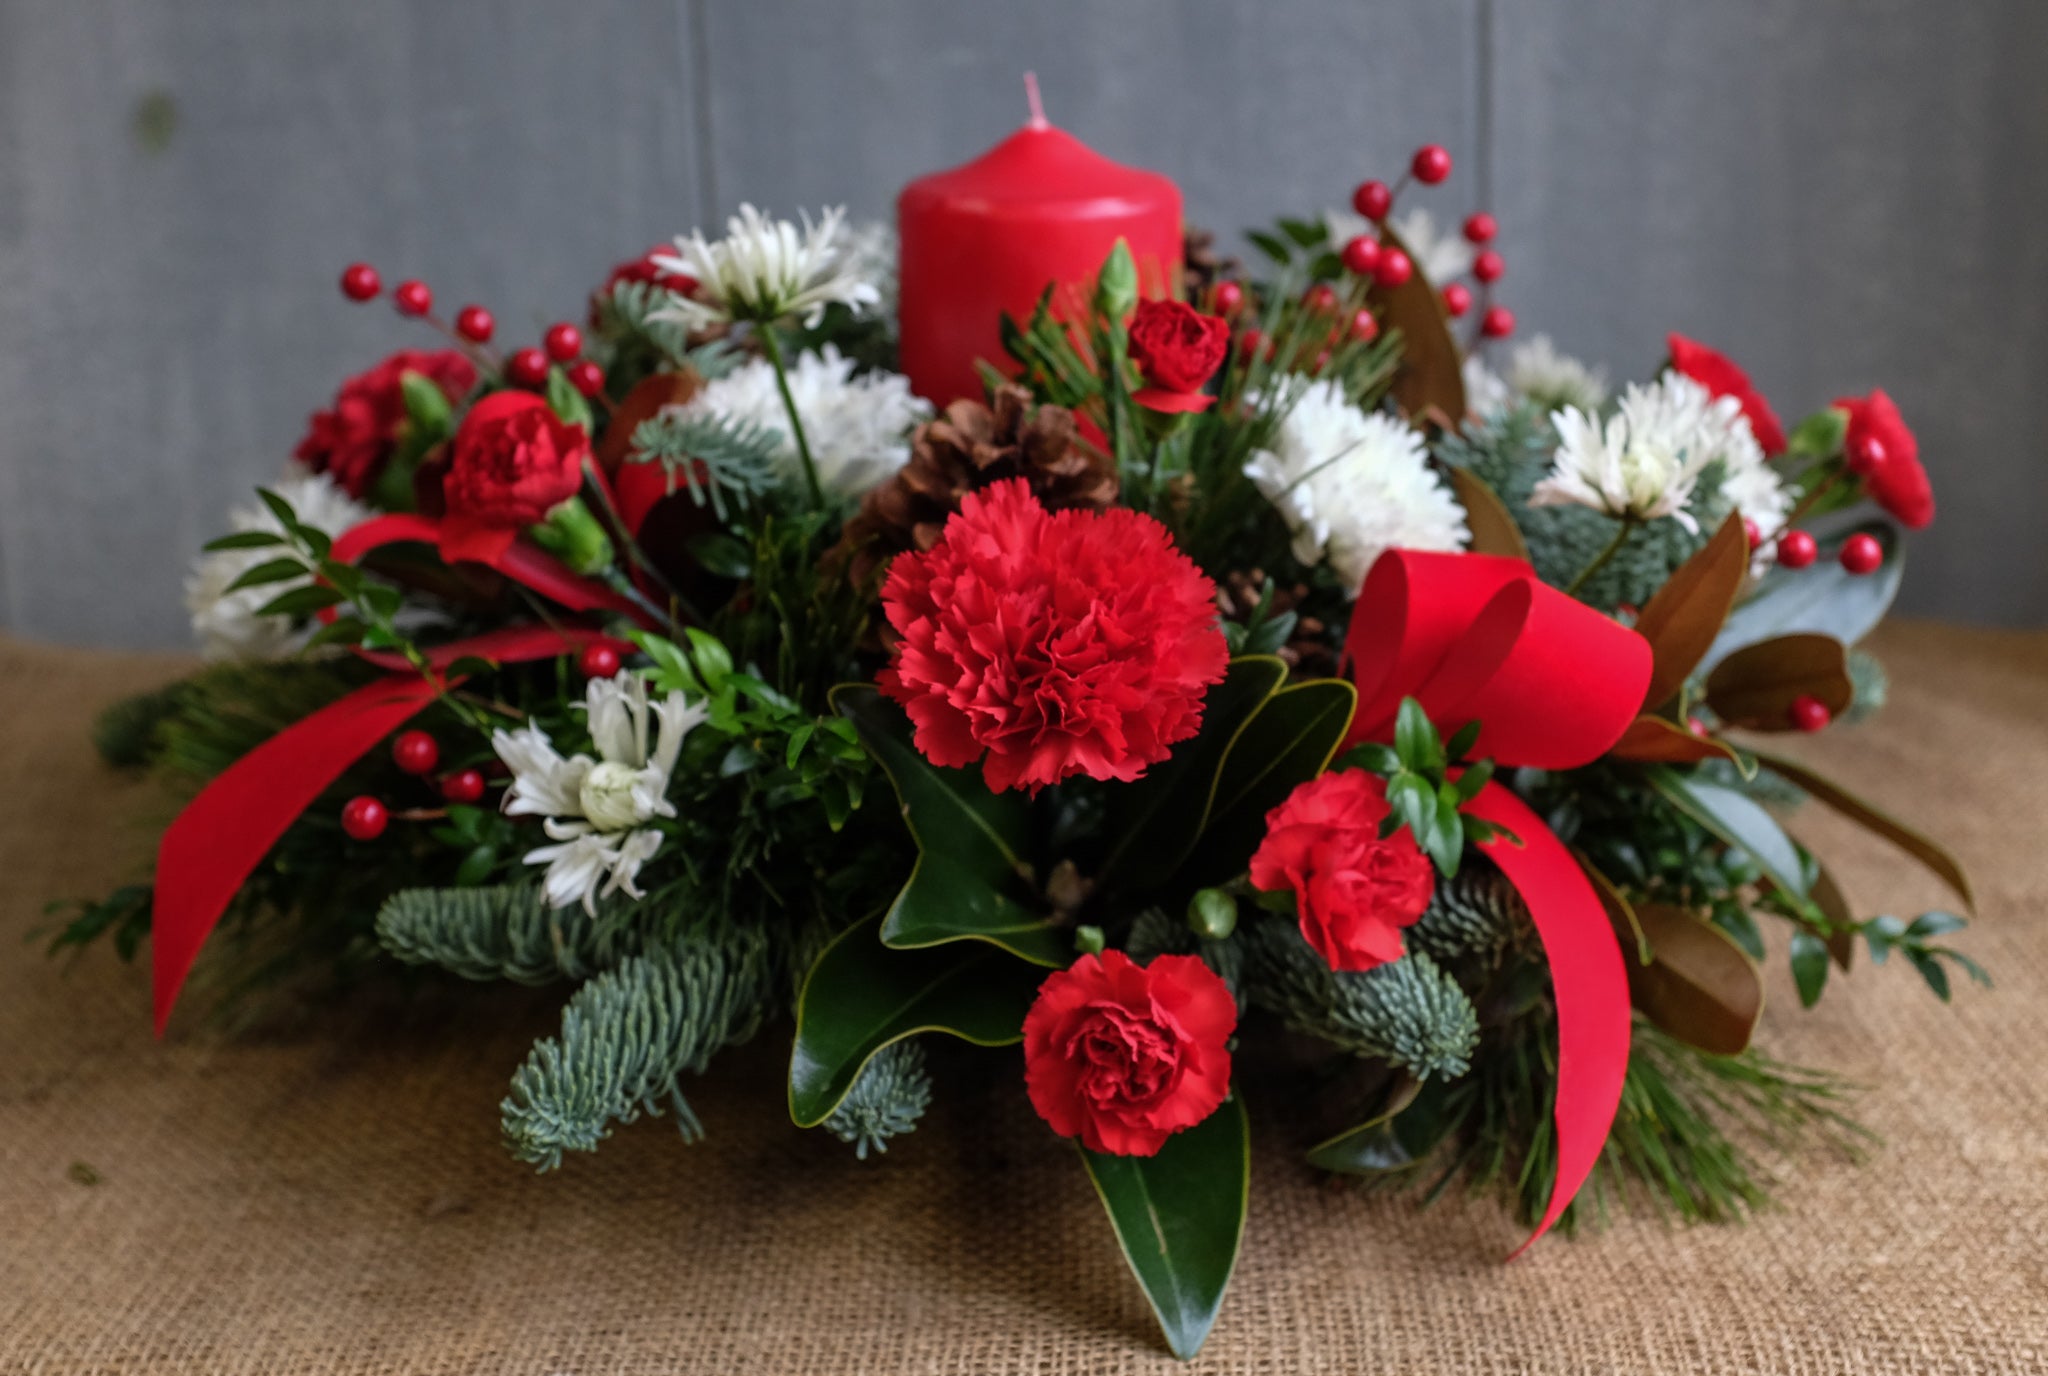 Floral centerpiece with carnations, mums, red bows, magnolia leaves, pine cones, and red pillar candle by Michler's Florist